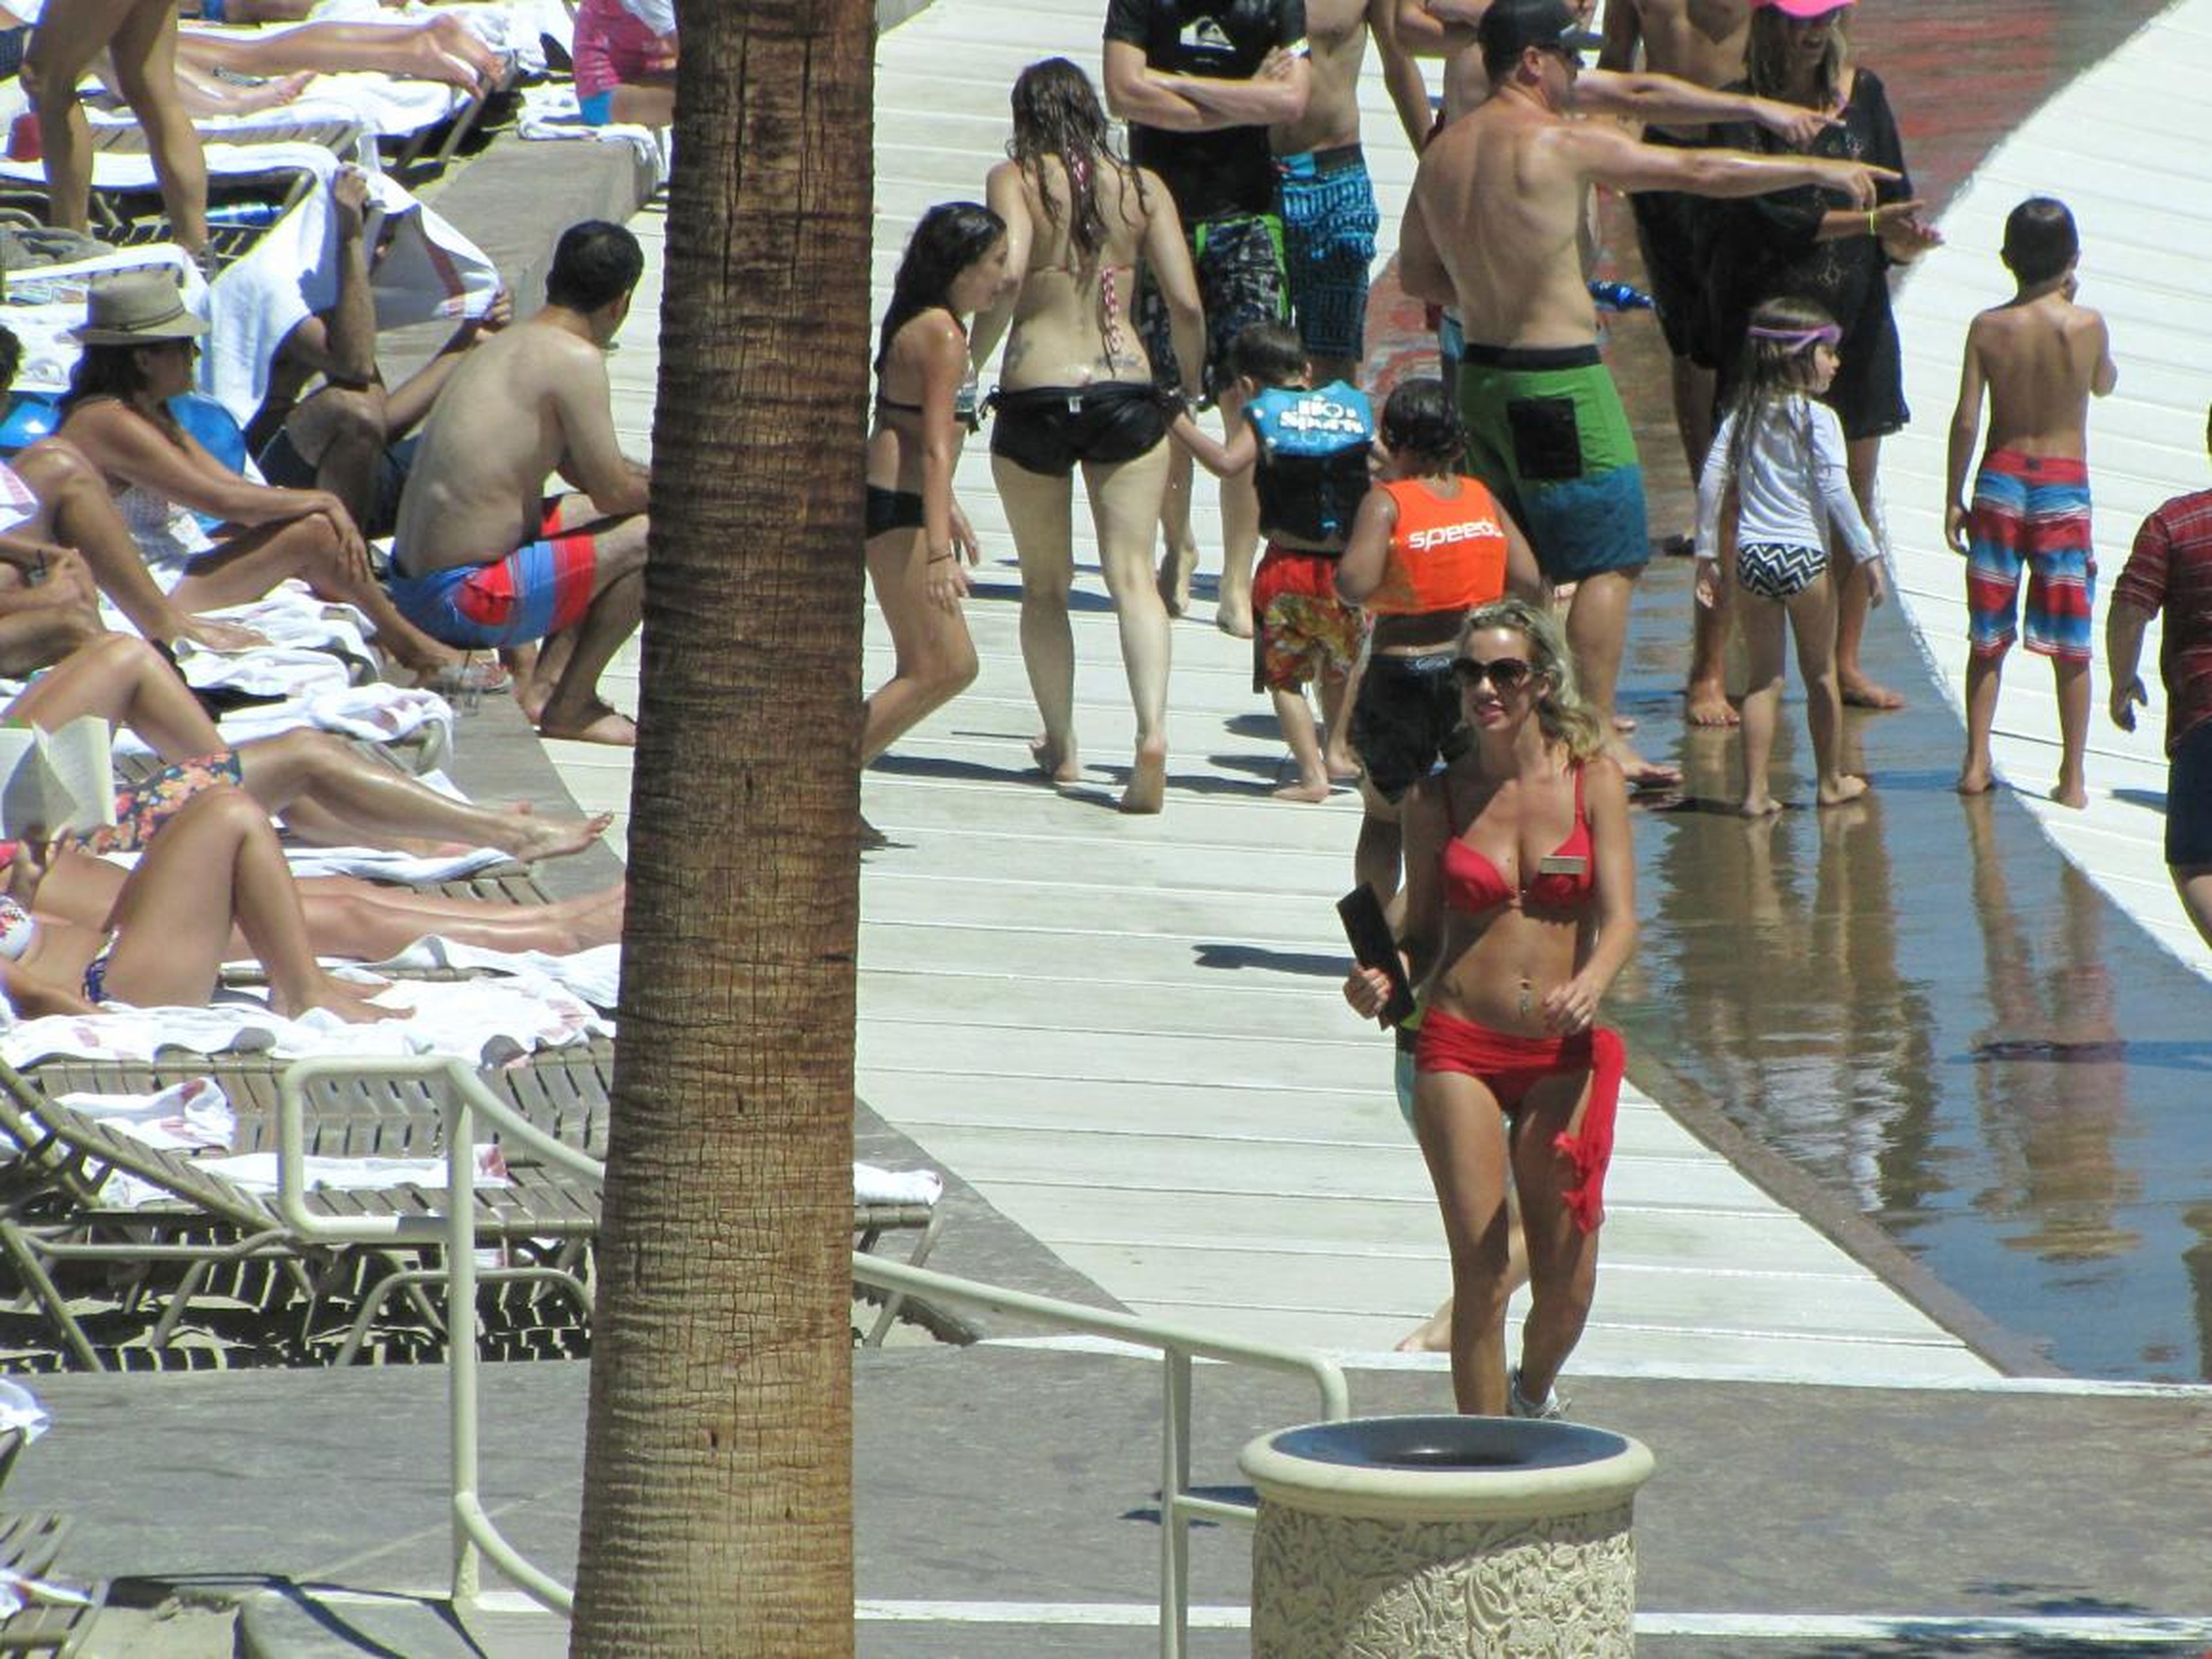 Just like photo-op locations, resort pools can be highly crowded.